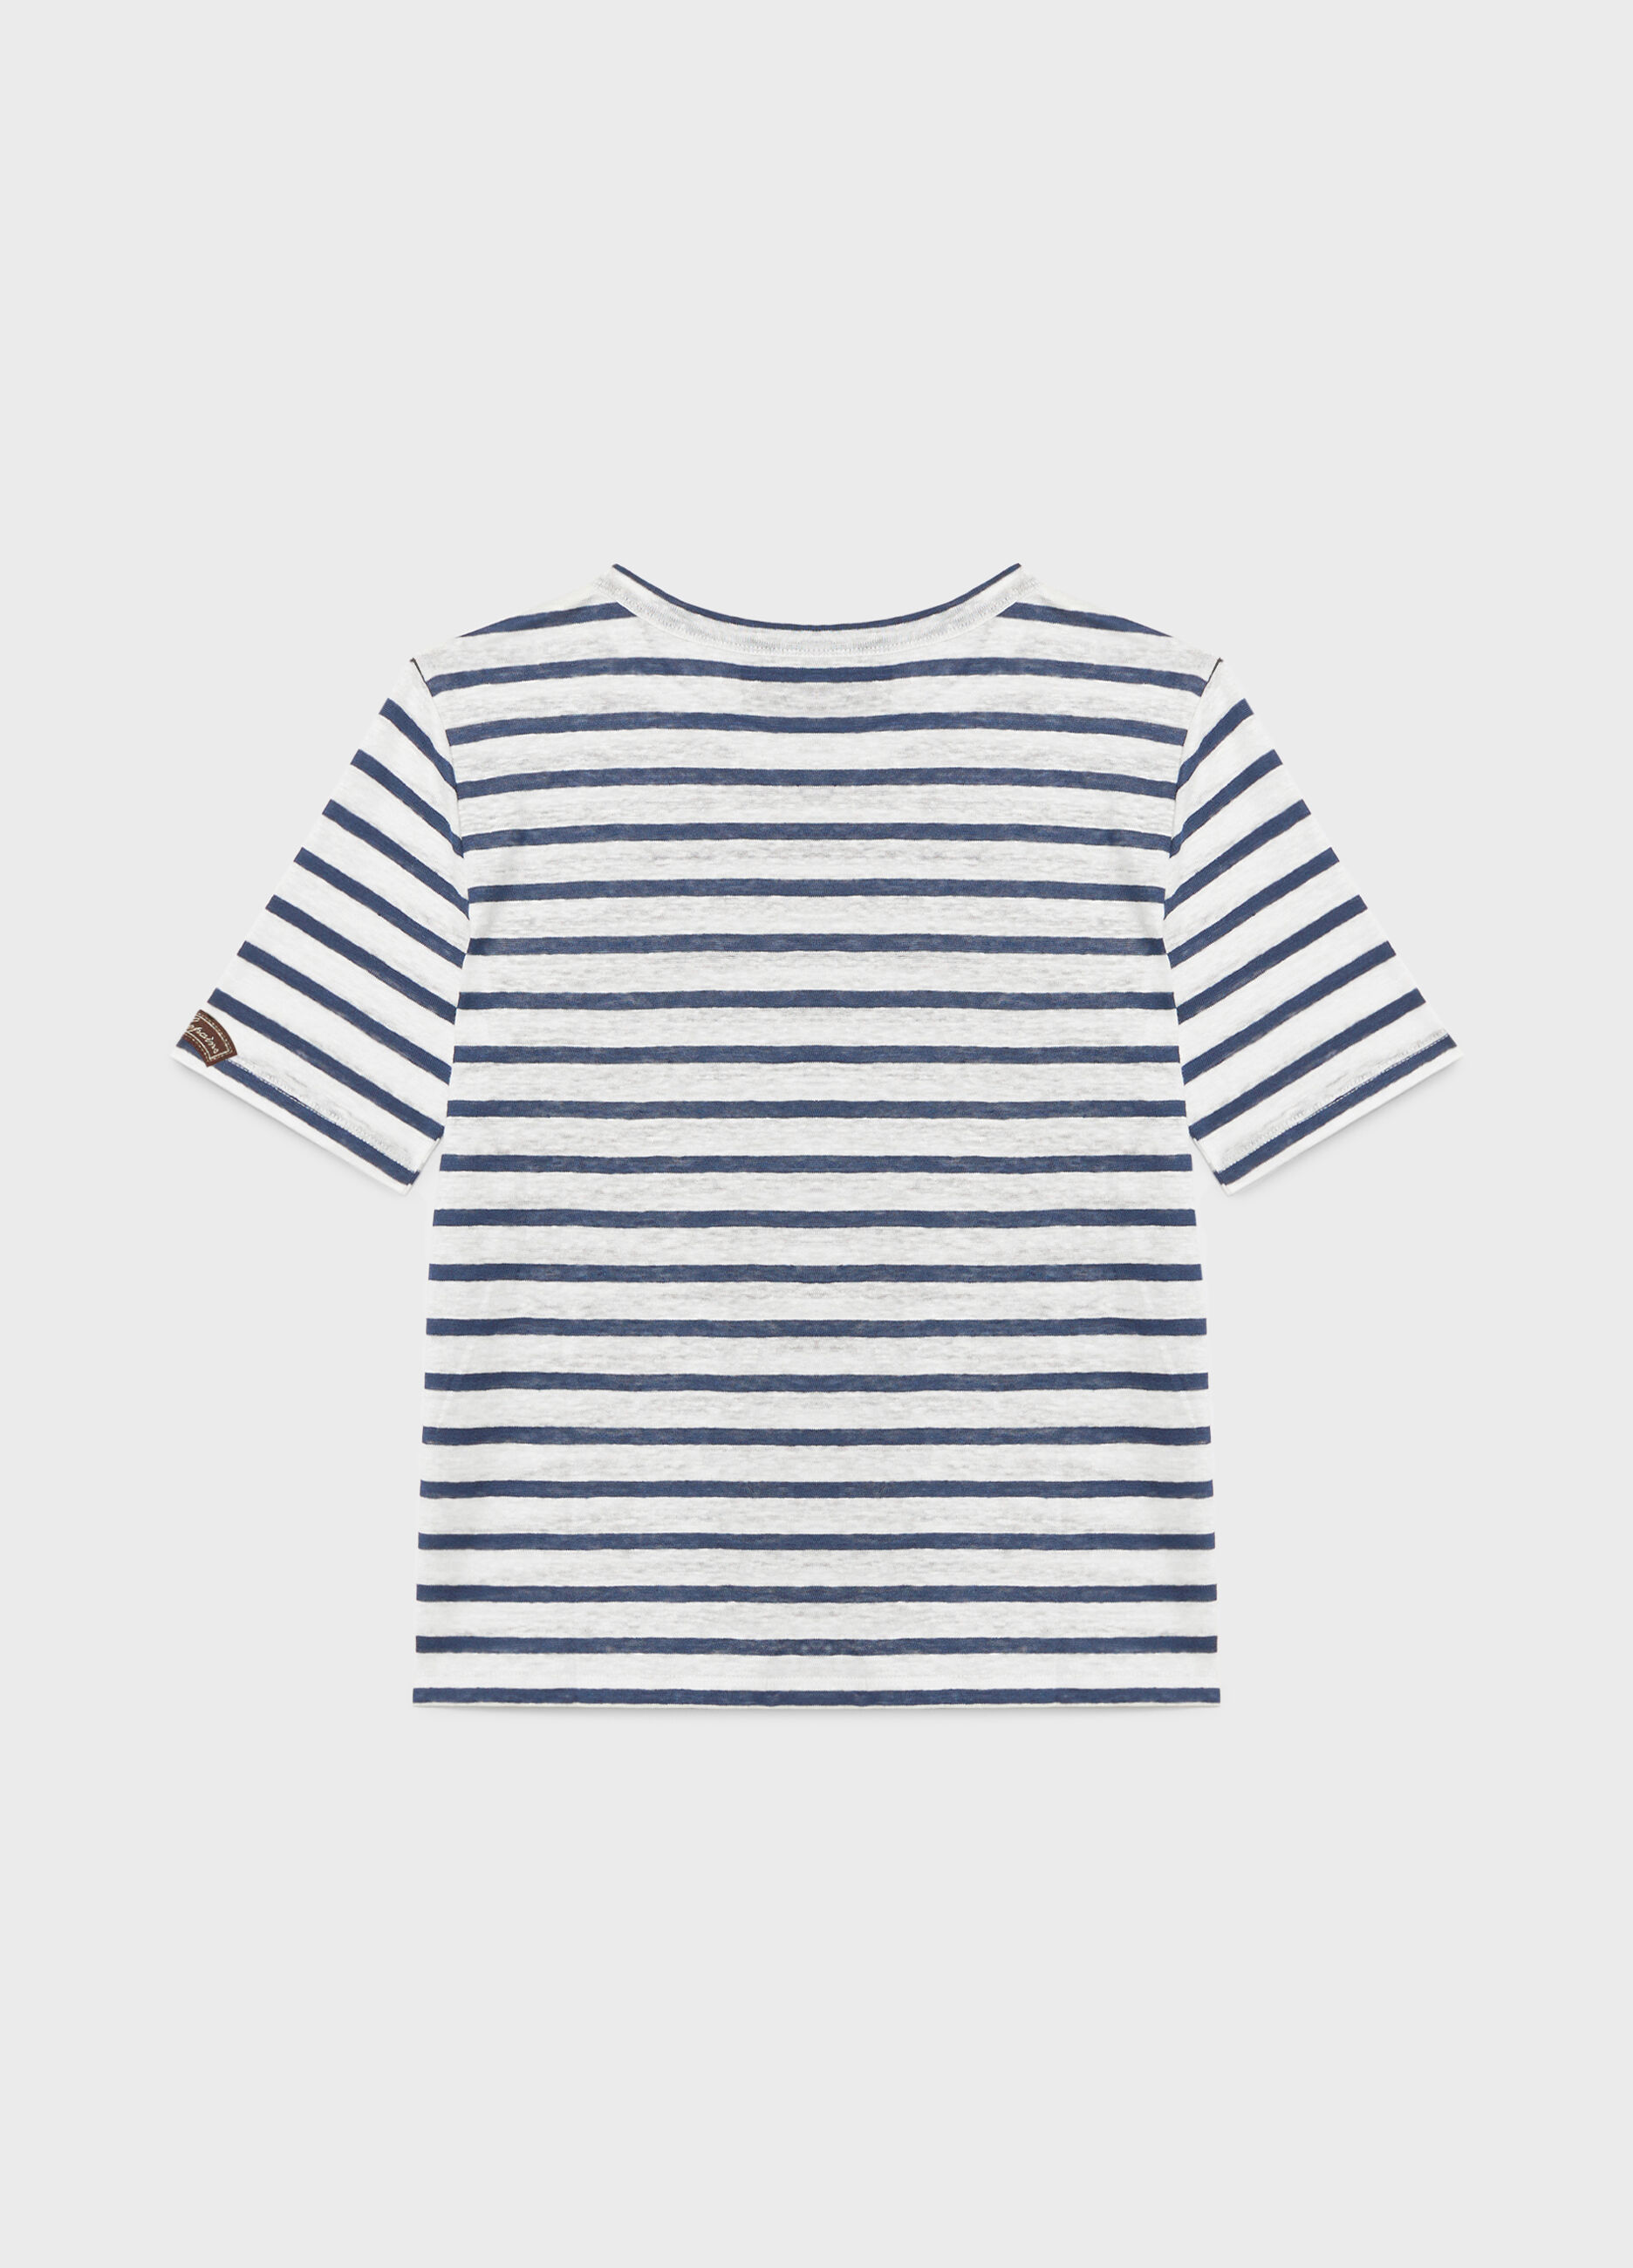 Striped T-shirt in pure linen